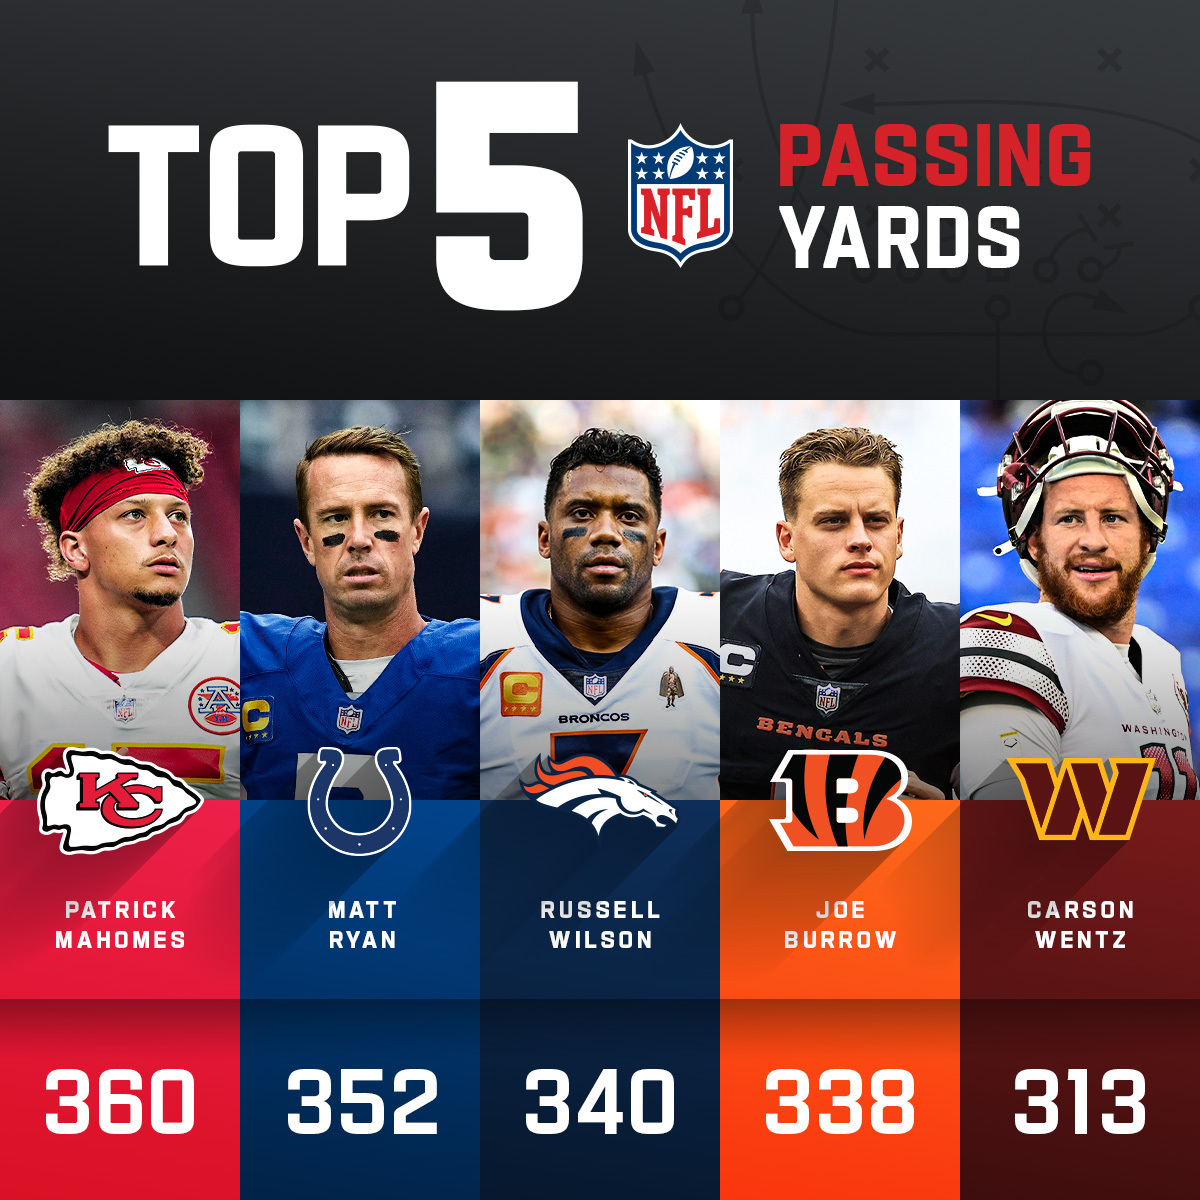 walil☎️ on Twitter: "RT @NFL: The passing yards leaders through the